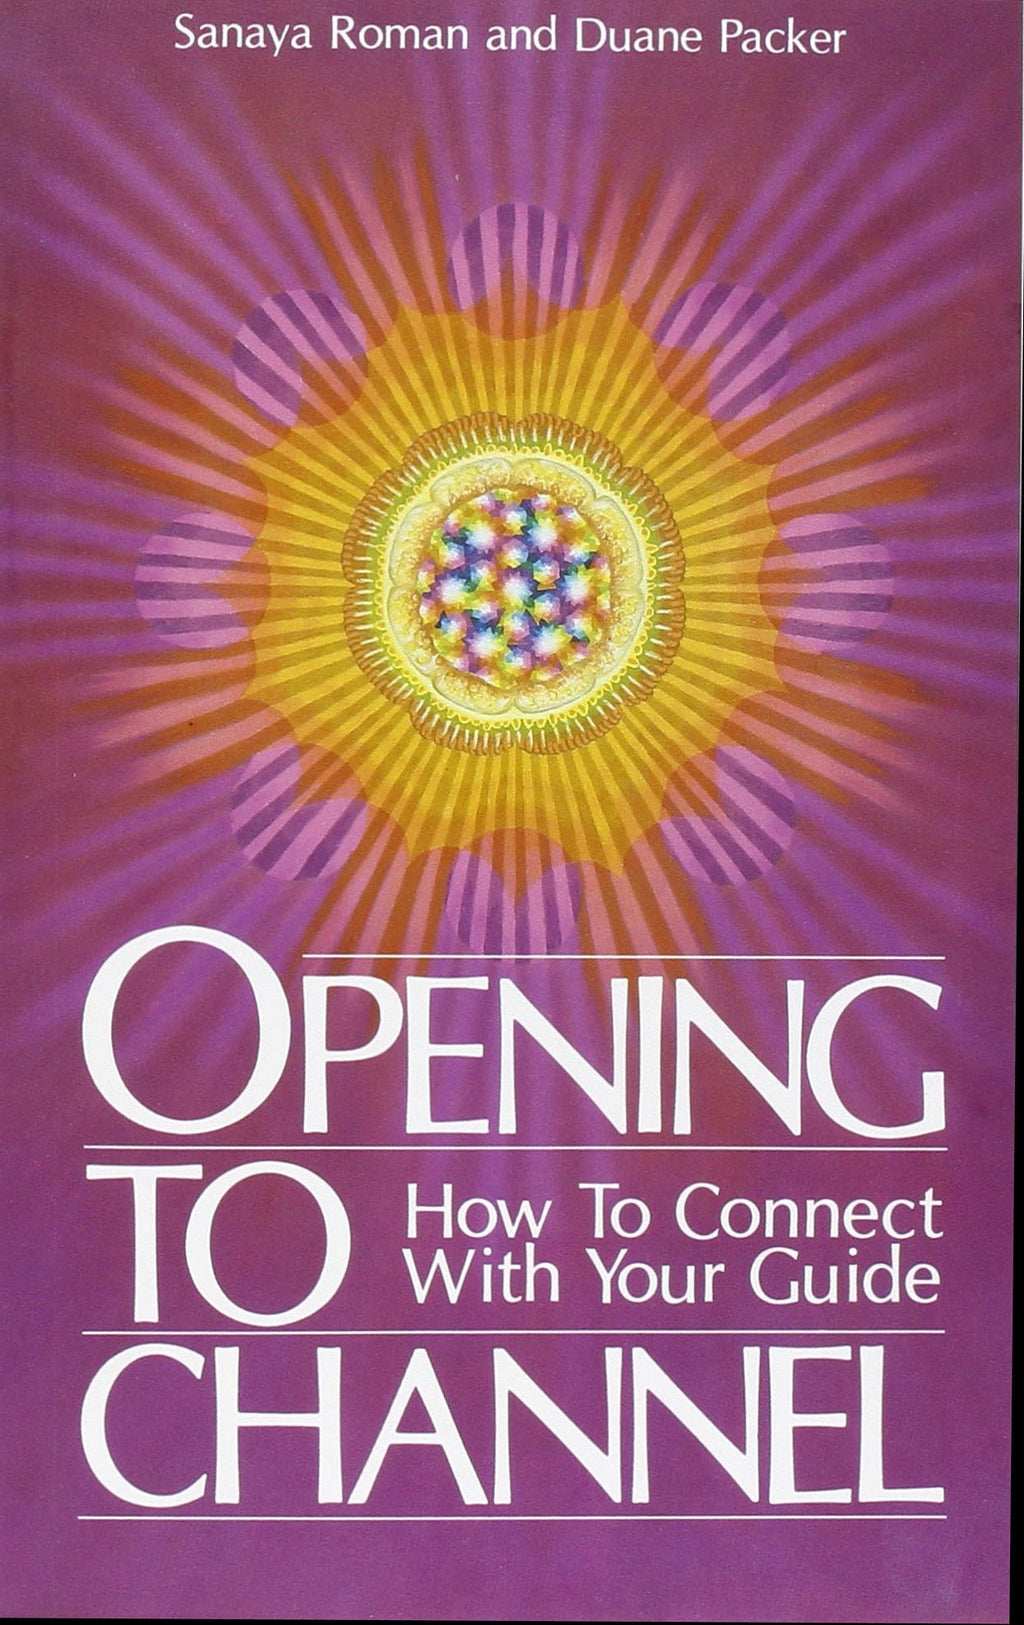 Opening to channel: How to connect with your guide: 0915811057